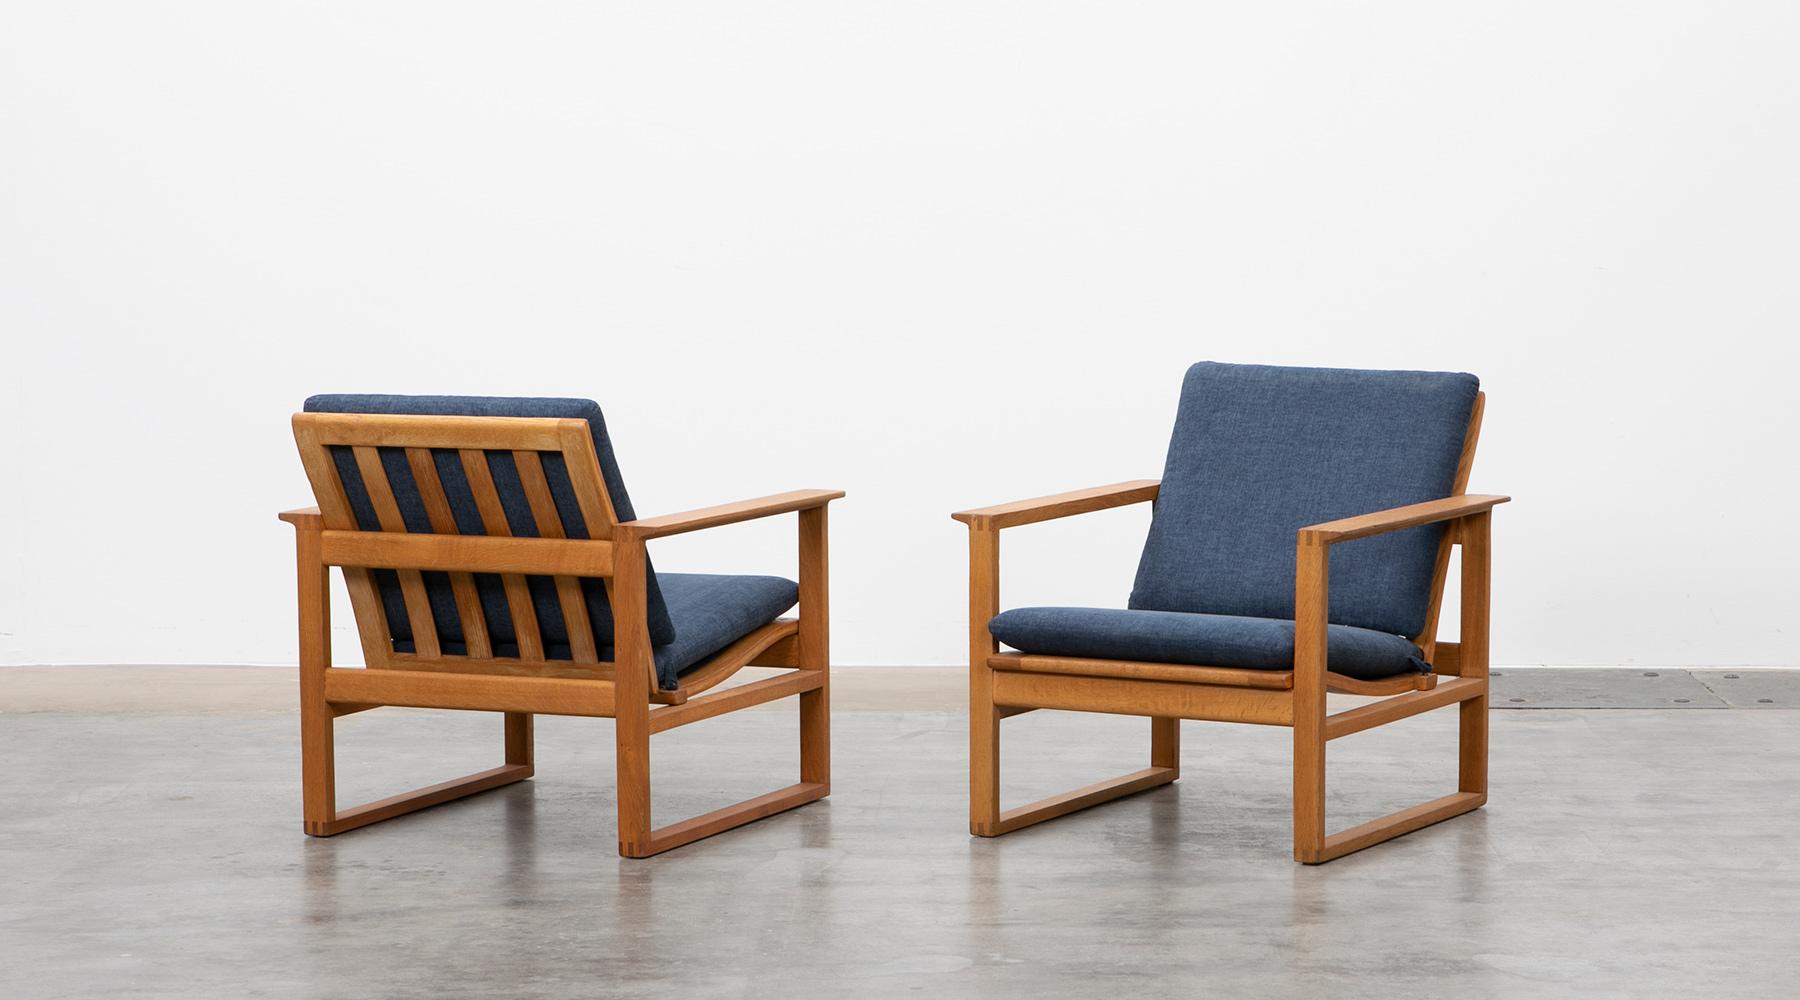 Pair of lounge chairs, oak, Borge Mogensen, Denmark, 1956.

Two comfortable solid oak lounge chairs designed by Børge Mogensen with beautiful manufactured details and new upholstered cushions with high-quality fabric. Perfect Scandinavian